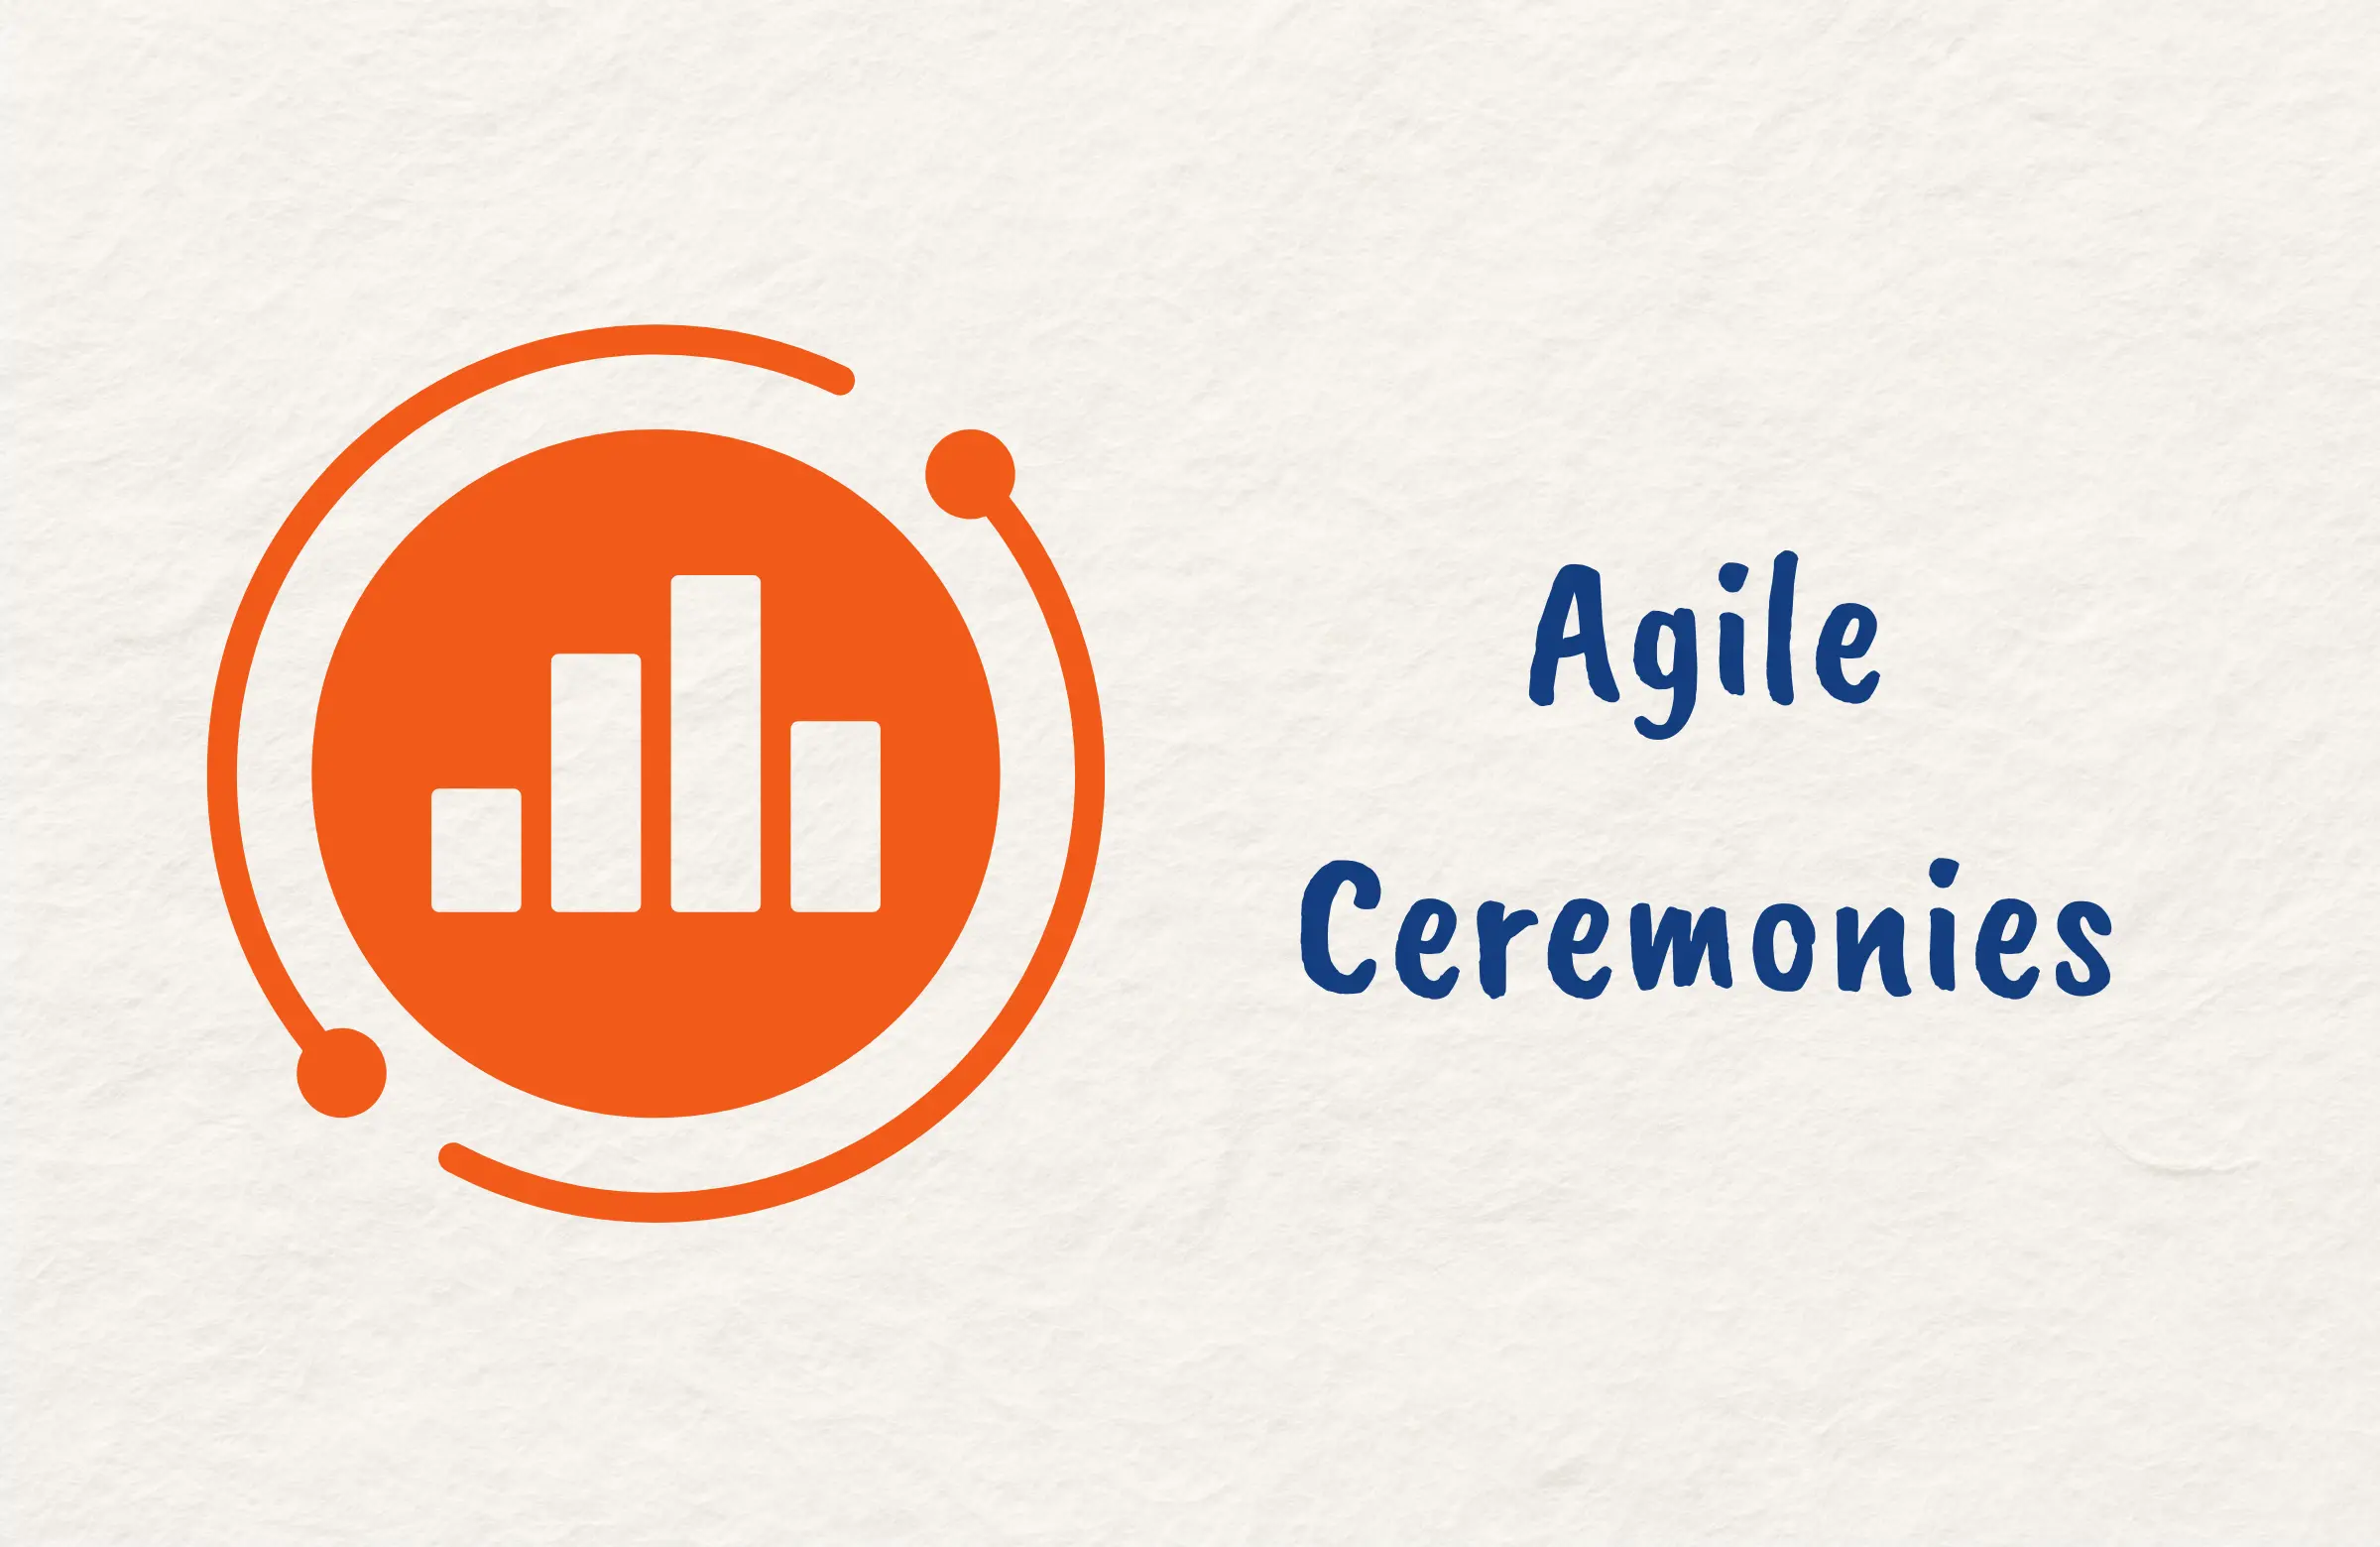 What is an Agile Ceremony